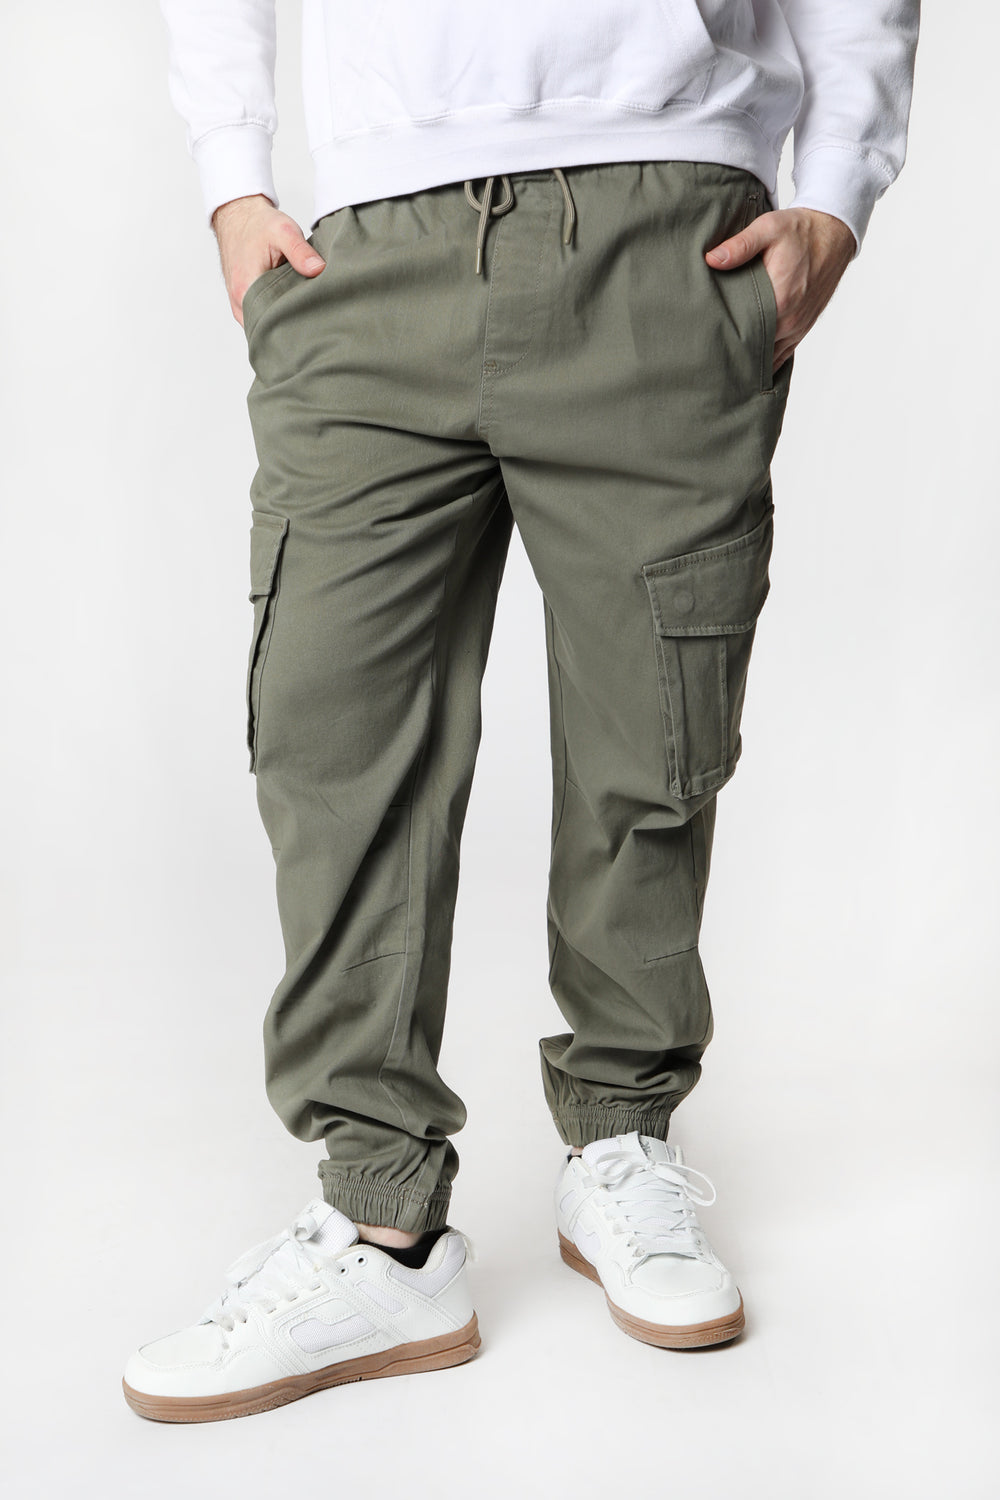 West49 Mens Twill Cargo Jogger Green